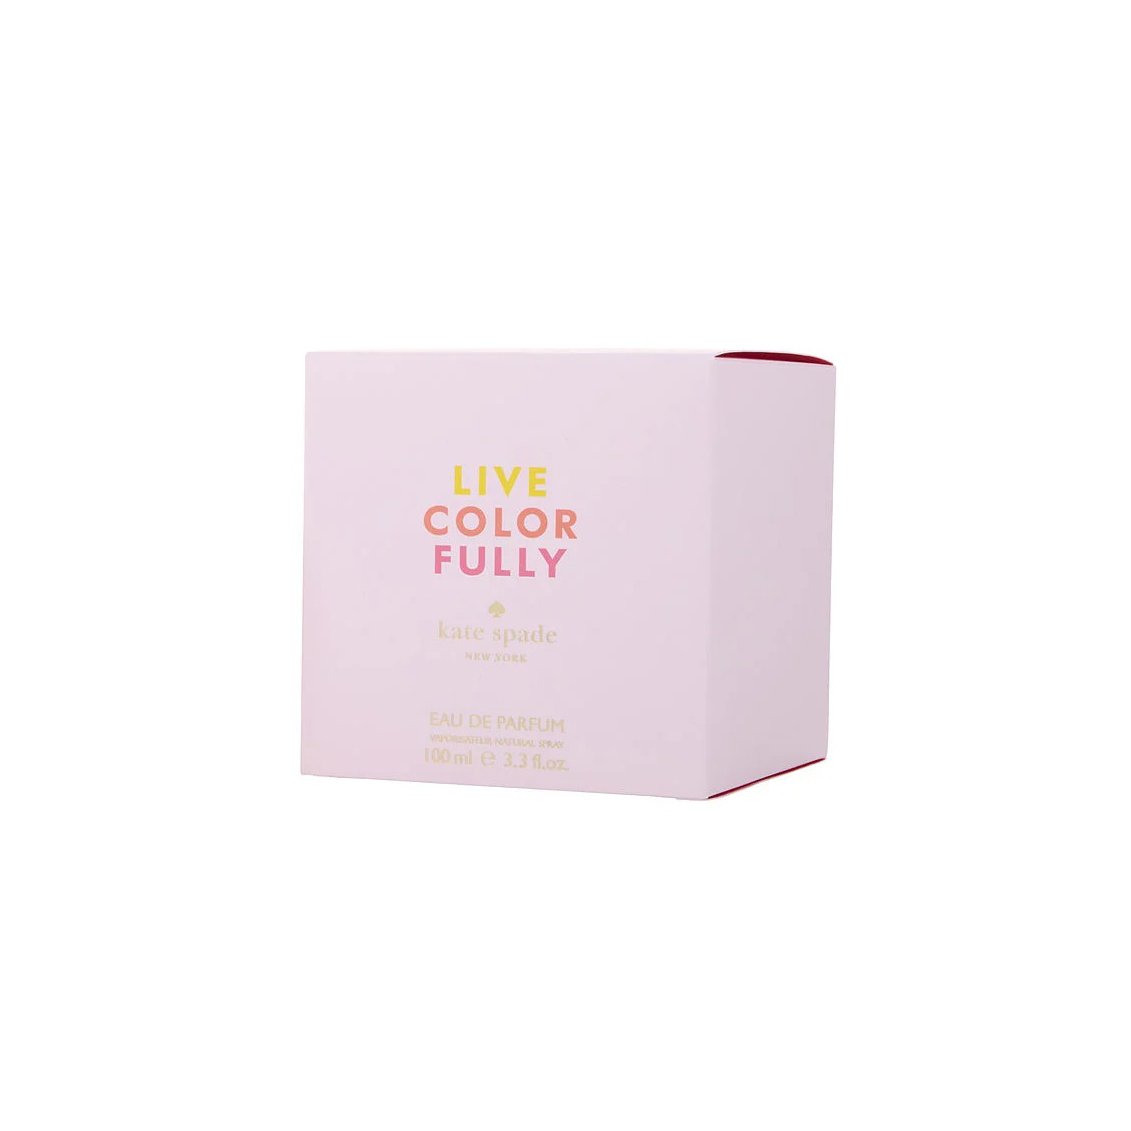 Live Colorfully By Kate Spade EDP Intense Spray 3.3 Oz For Women